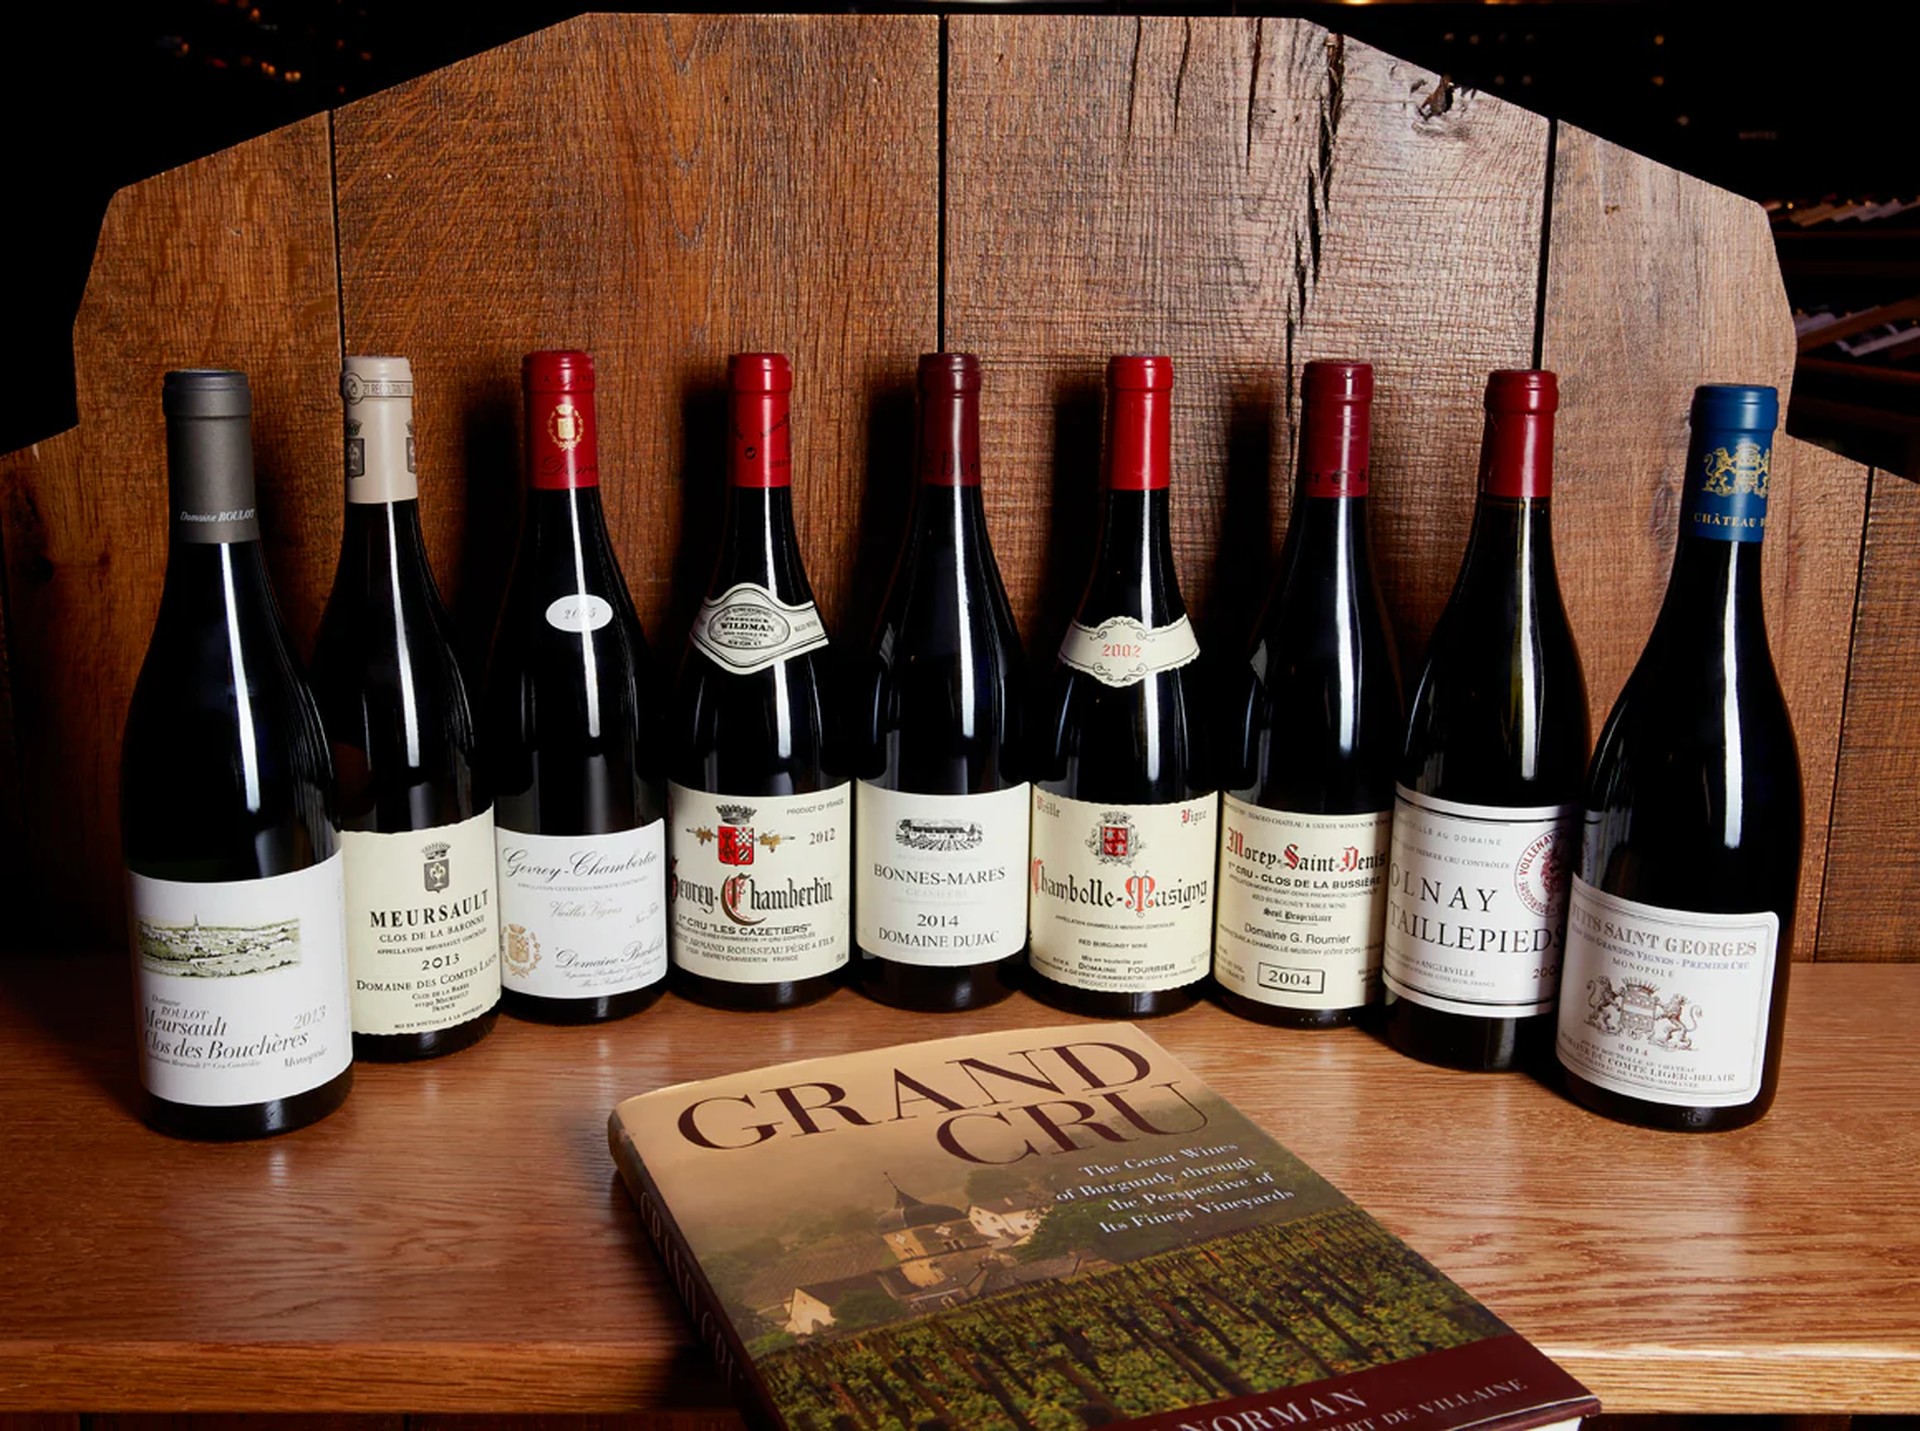 A captivating photograph of Burgundy wines, showing the essence of French viticulture and tradition, featuring the Burgundy wines.